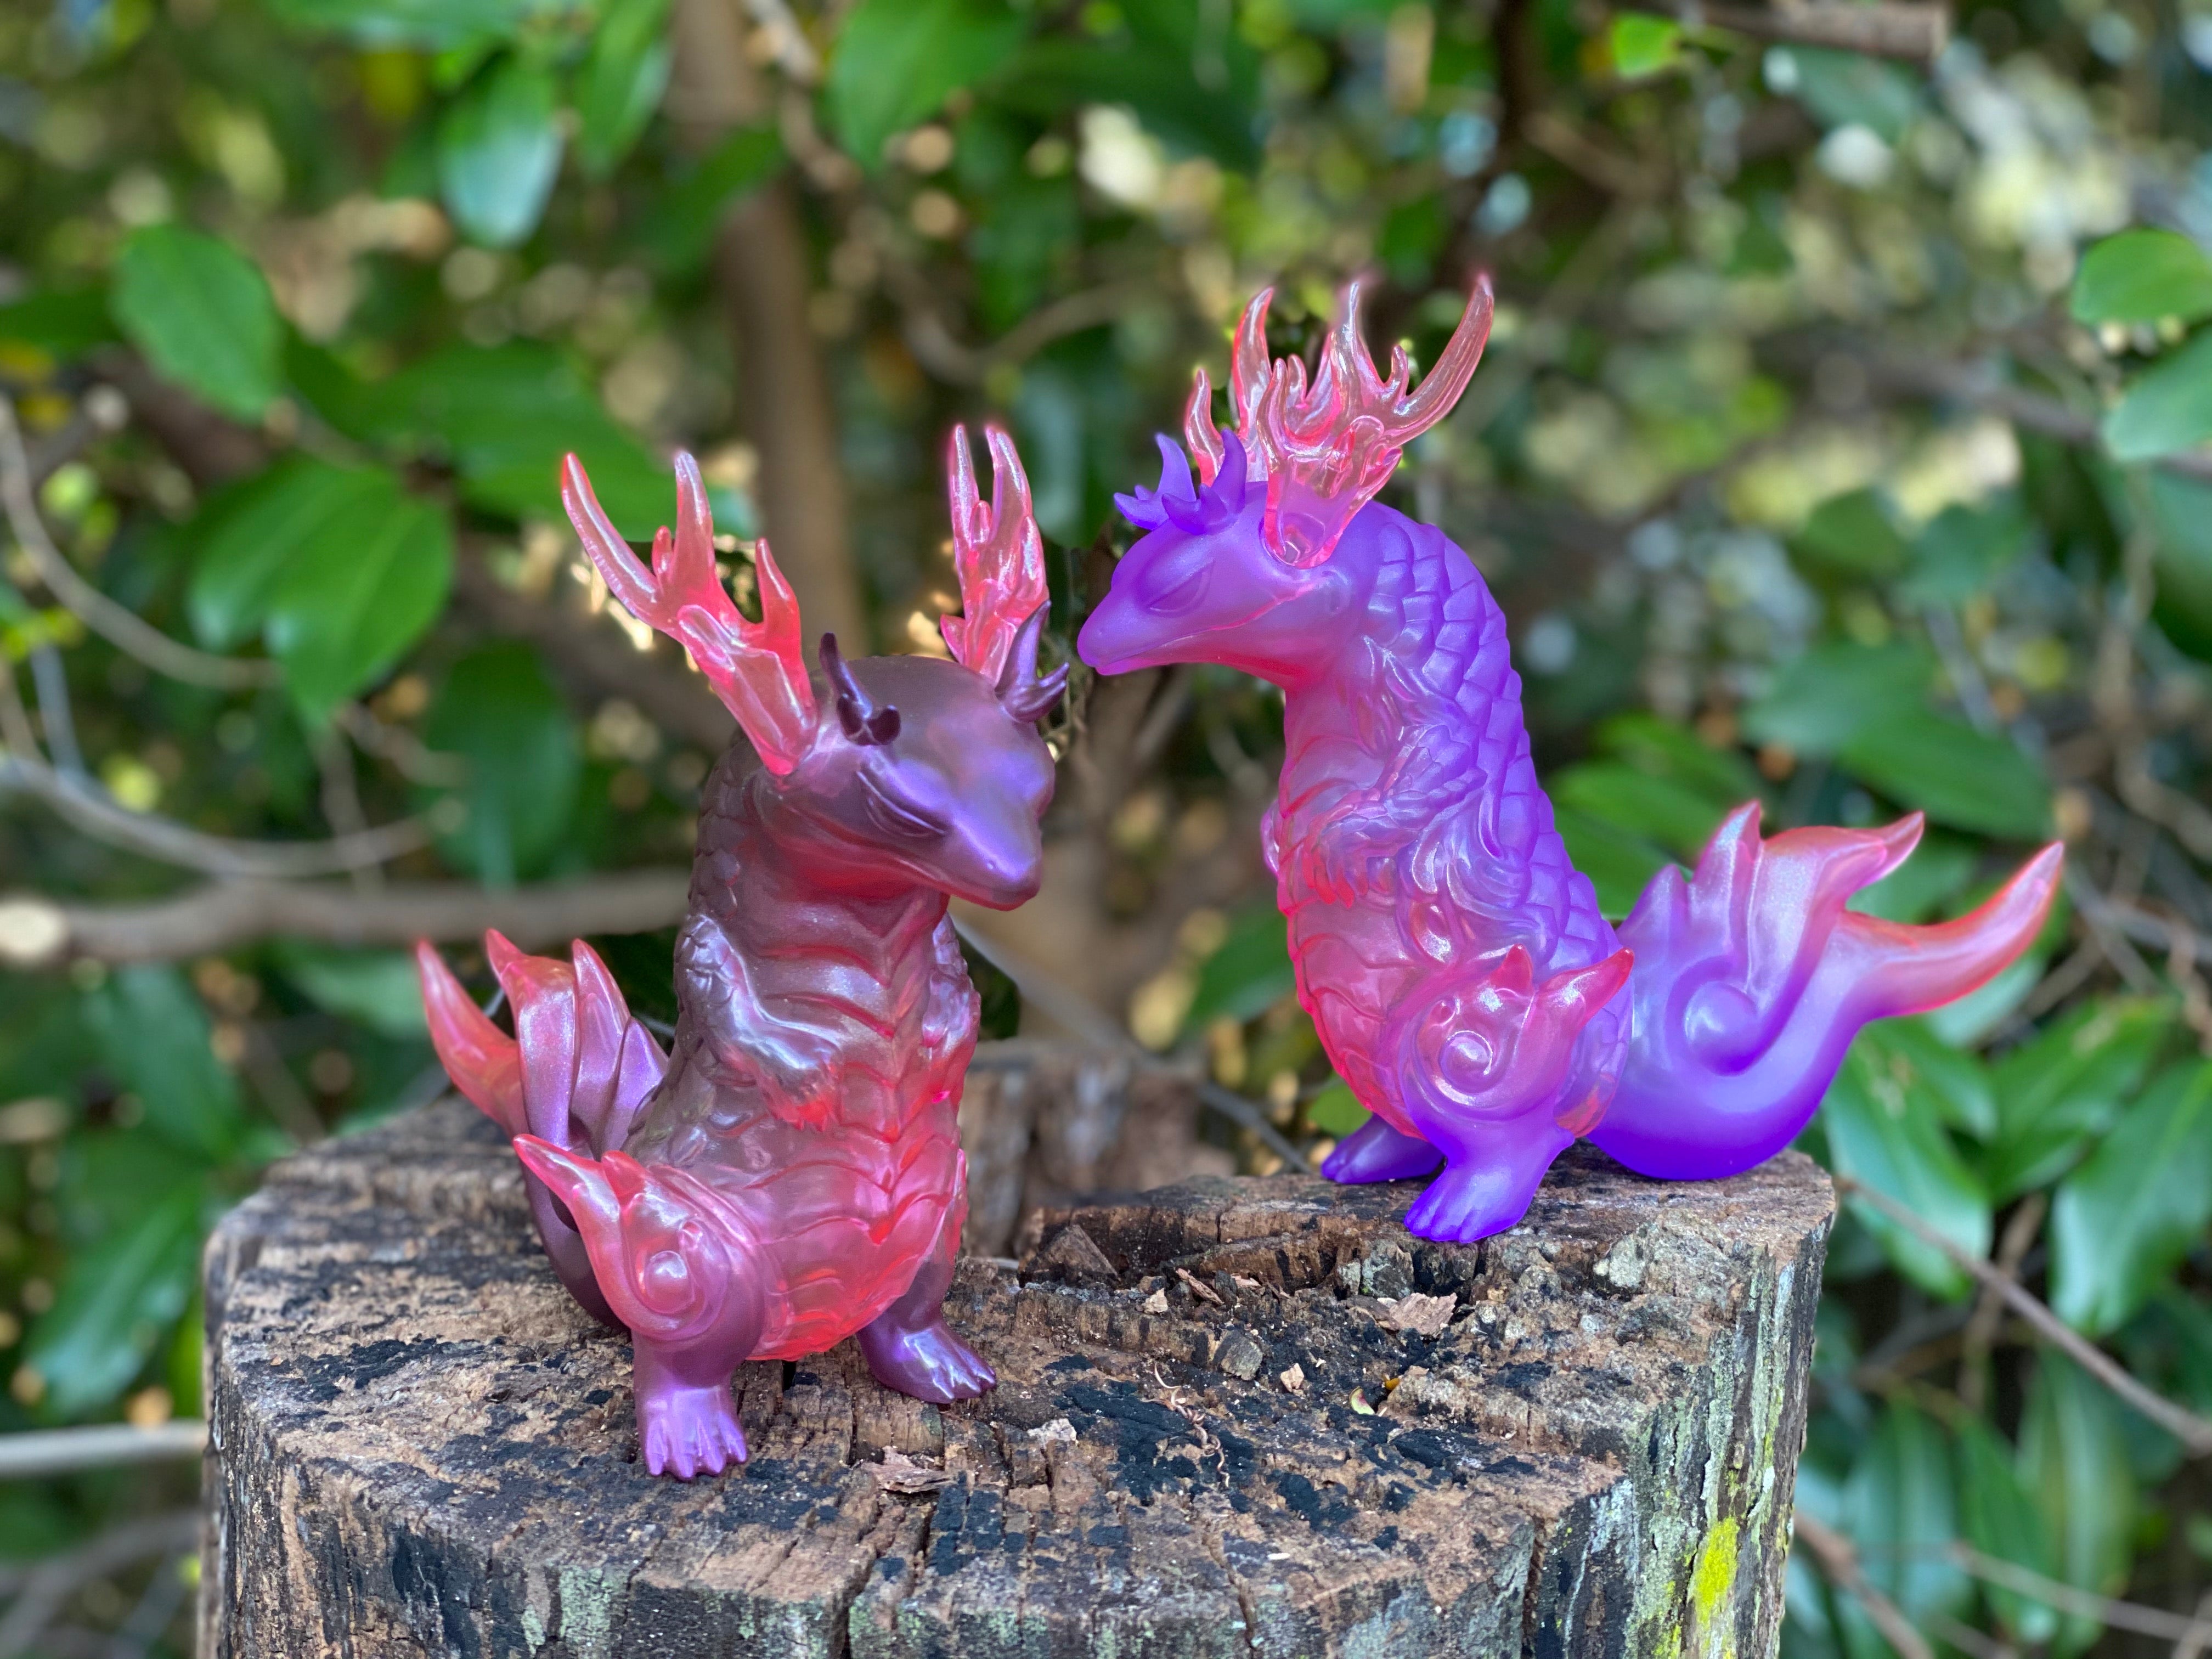 Japanese Soft Vinyl toy featuring two dragons on a tree stump, designed by Kashi. Dimensions: 15cm tall, 18cm from nose to tail.